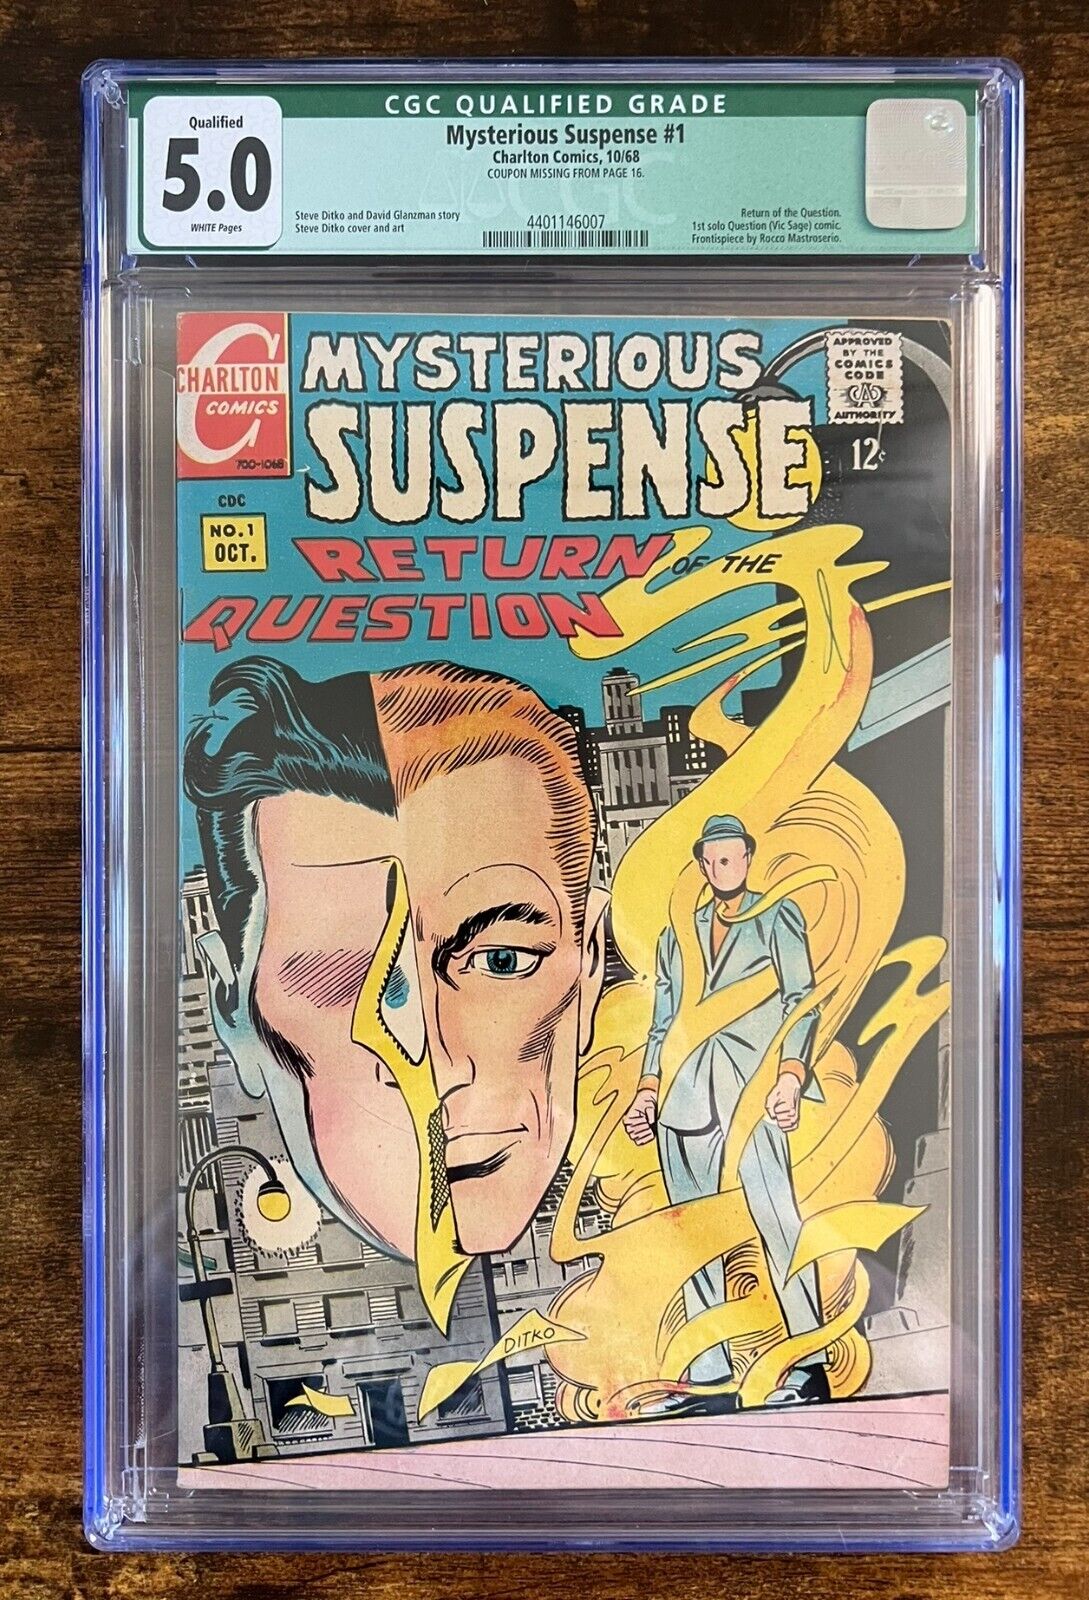 MYSTERIOUS SUSPENSE #1 1st VIC SAGE the QUESTION 1968 Charlton DCU DITKO CGC 5.0